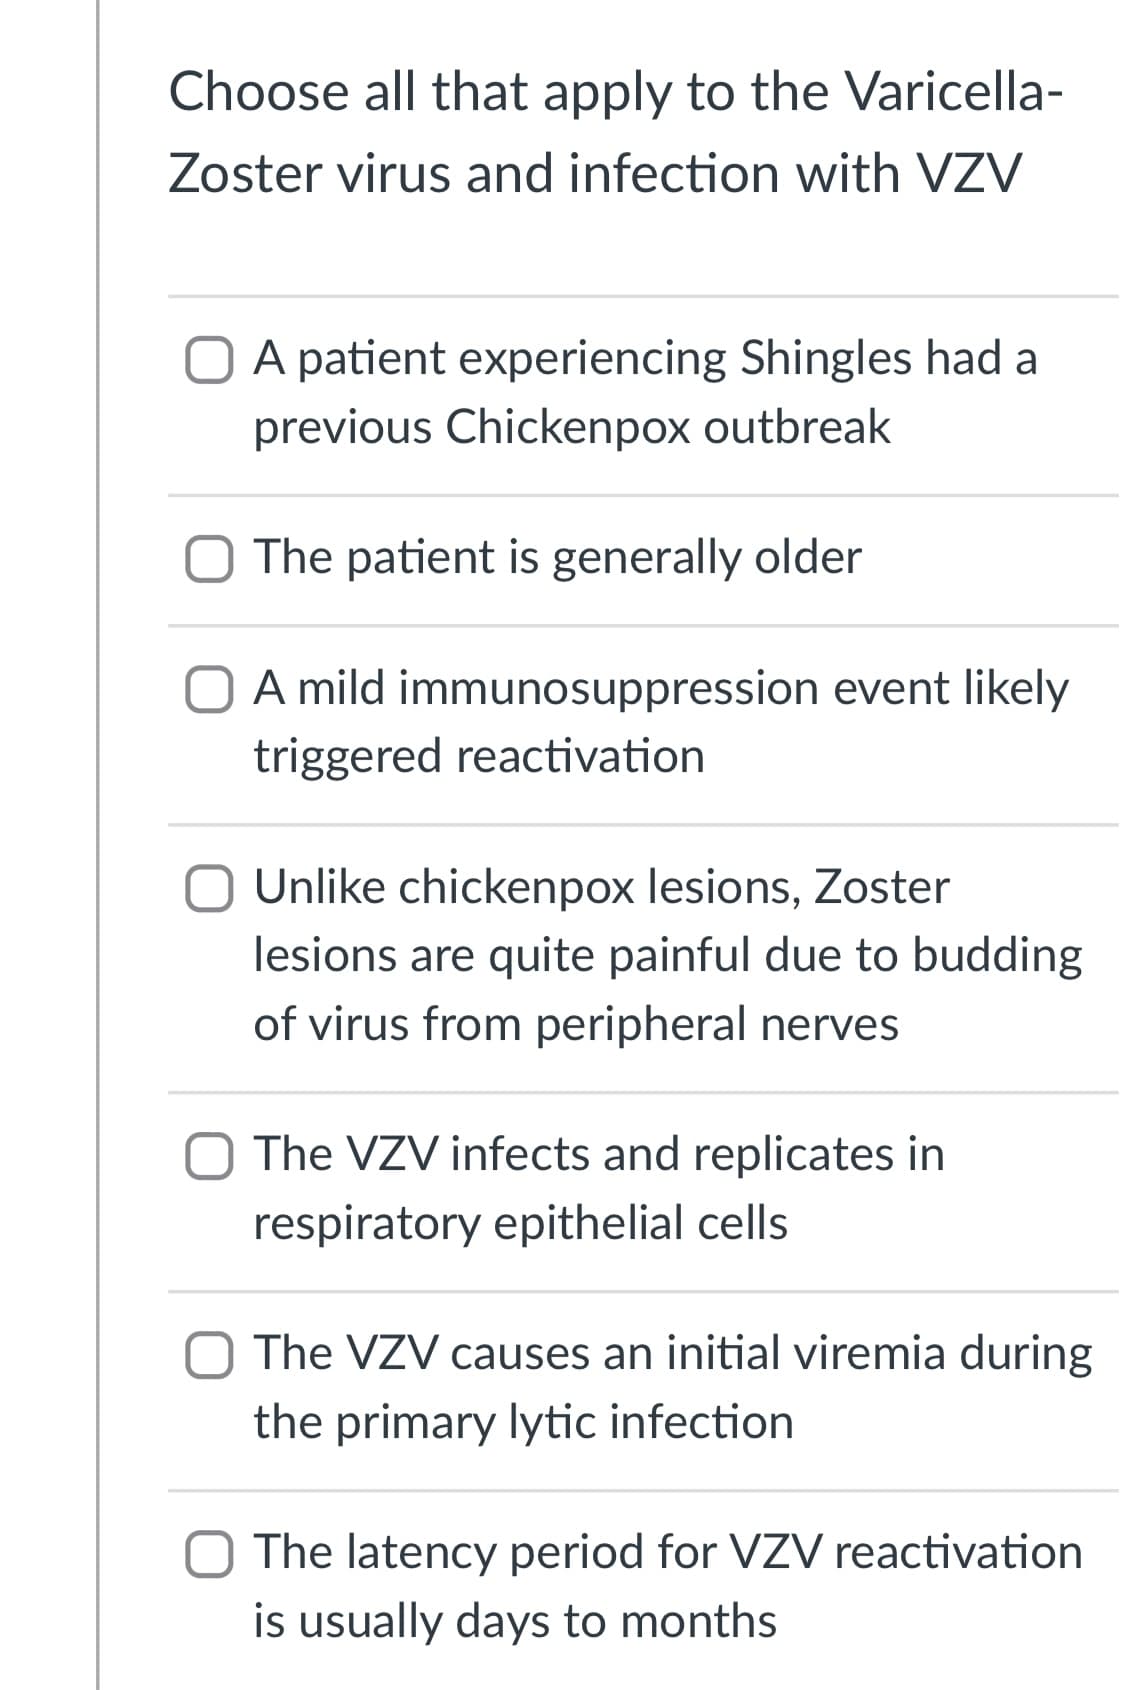 Choose all that apply to the Varicella-
Zoster virus and infection with VZV
A patient experiencing Shingles had a
previous Chickenpox outbreak
O The patient is generally older
A mild immunosuppression event likely
triggered reactivation
Unlike chickenpox lesions, Zoster
lesions are quite painful due to budding
of virus from peripheral nerves
The VZV infects and replicates in
respiratory epithelial cells
The VZV causes an initial viremia during
the primary lytic infection
O The latency period for VZV reactivation
is usually days to months
